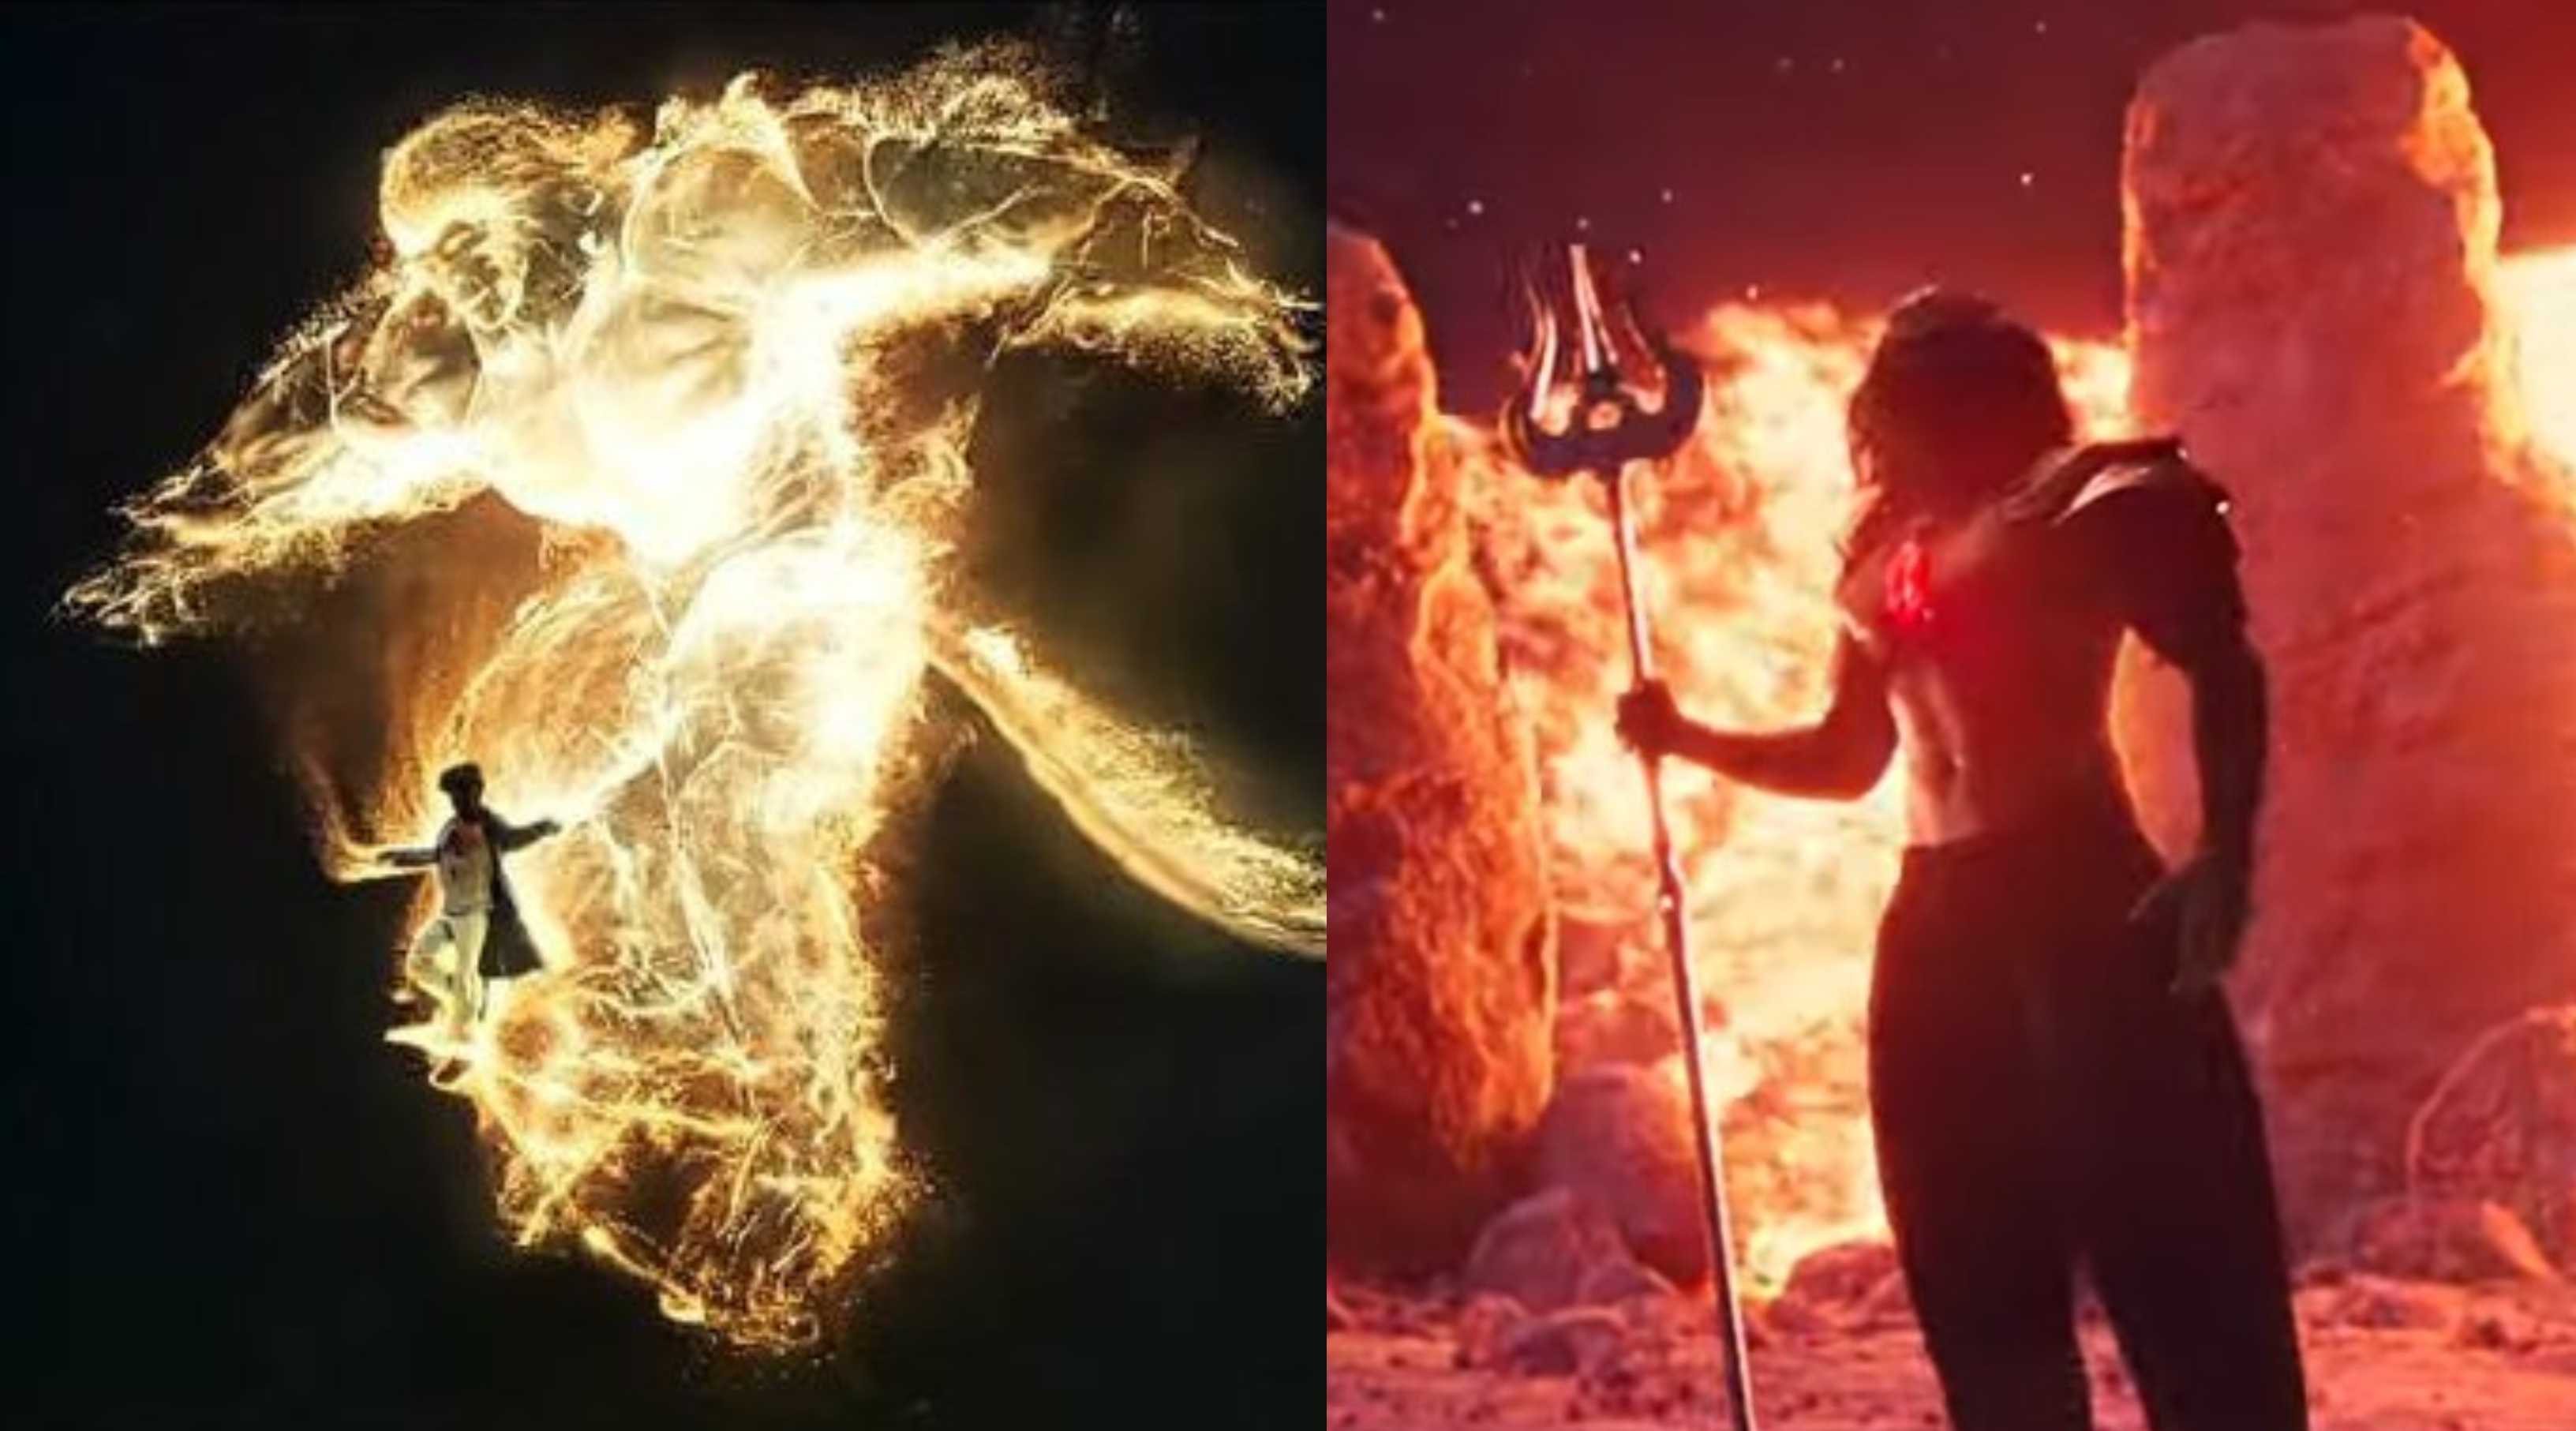 Brahmāstra trailer: Is Shah Rukh Khan portraying the role of ‘hanuman-astra’ in the film? Fans are confused